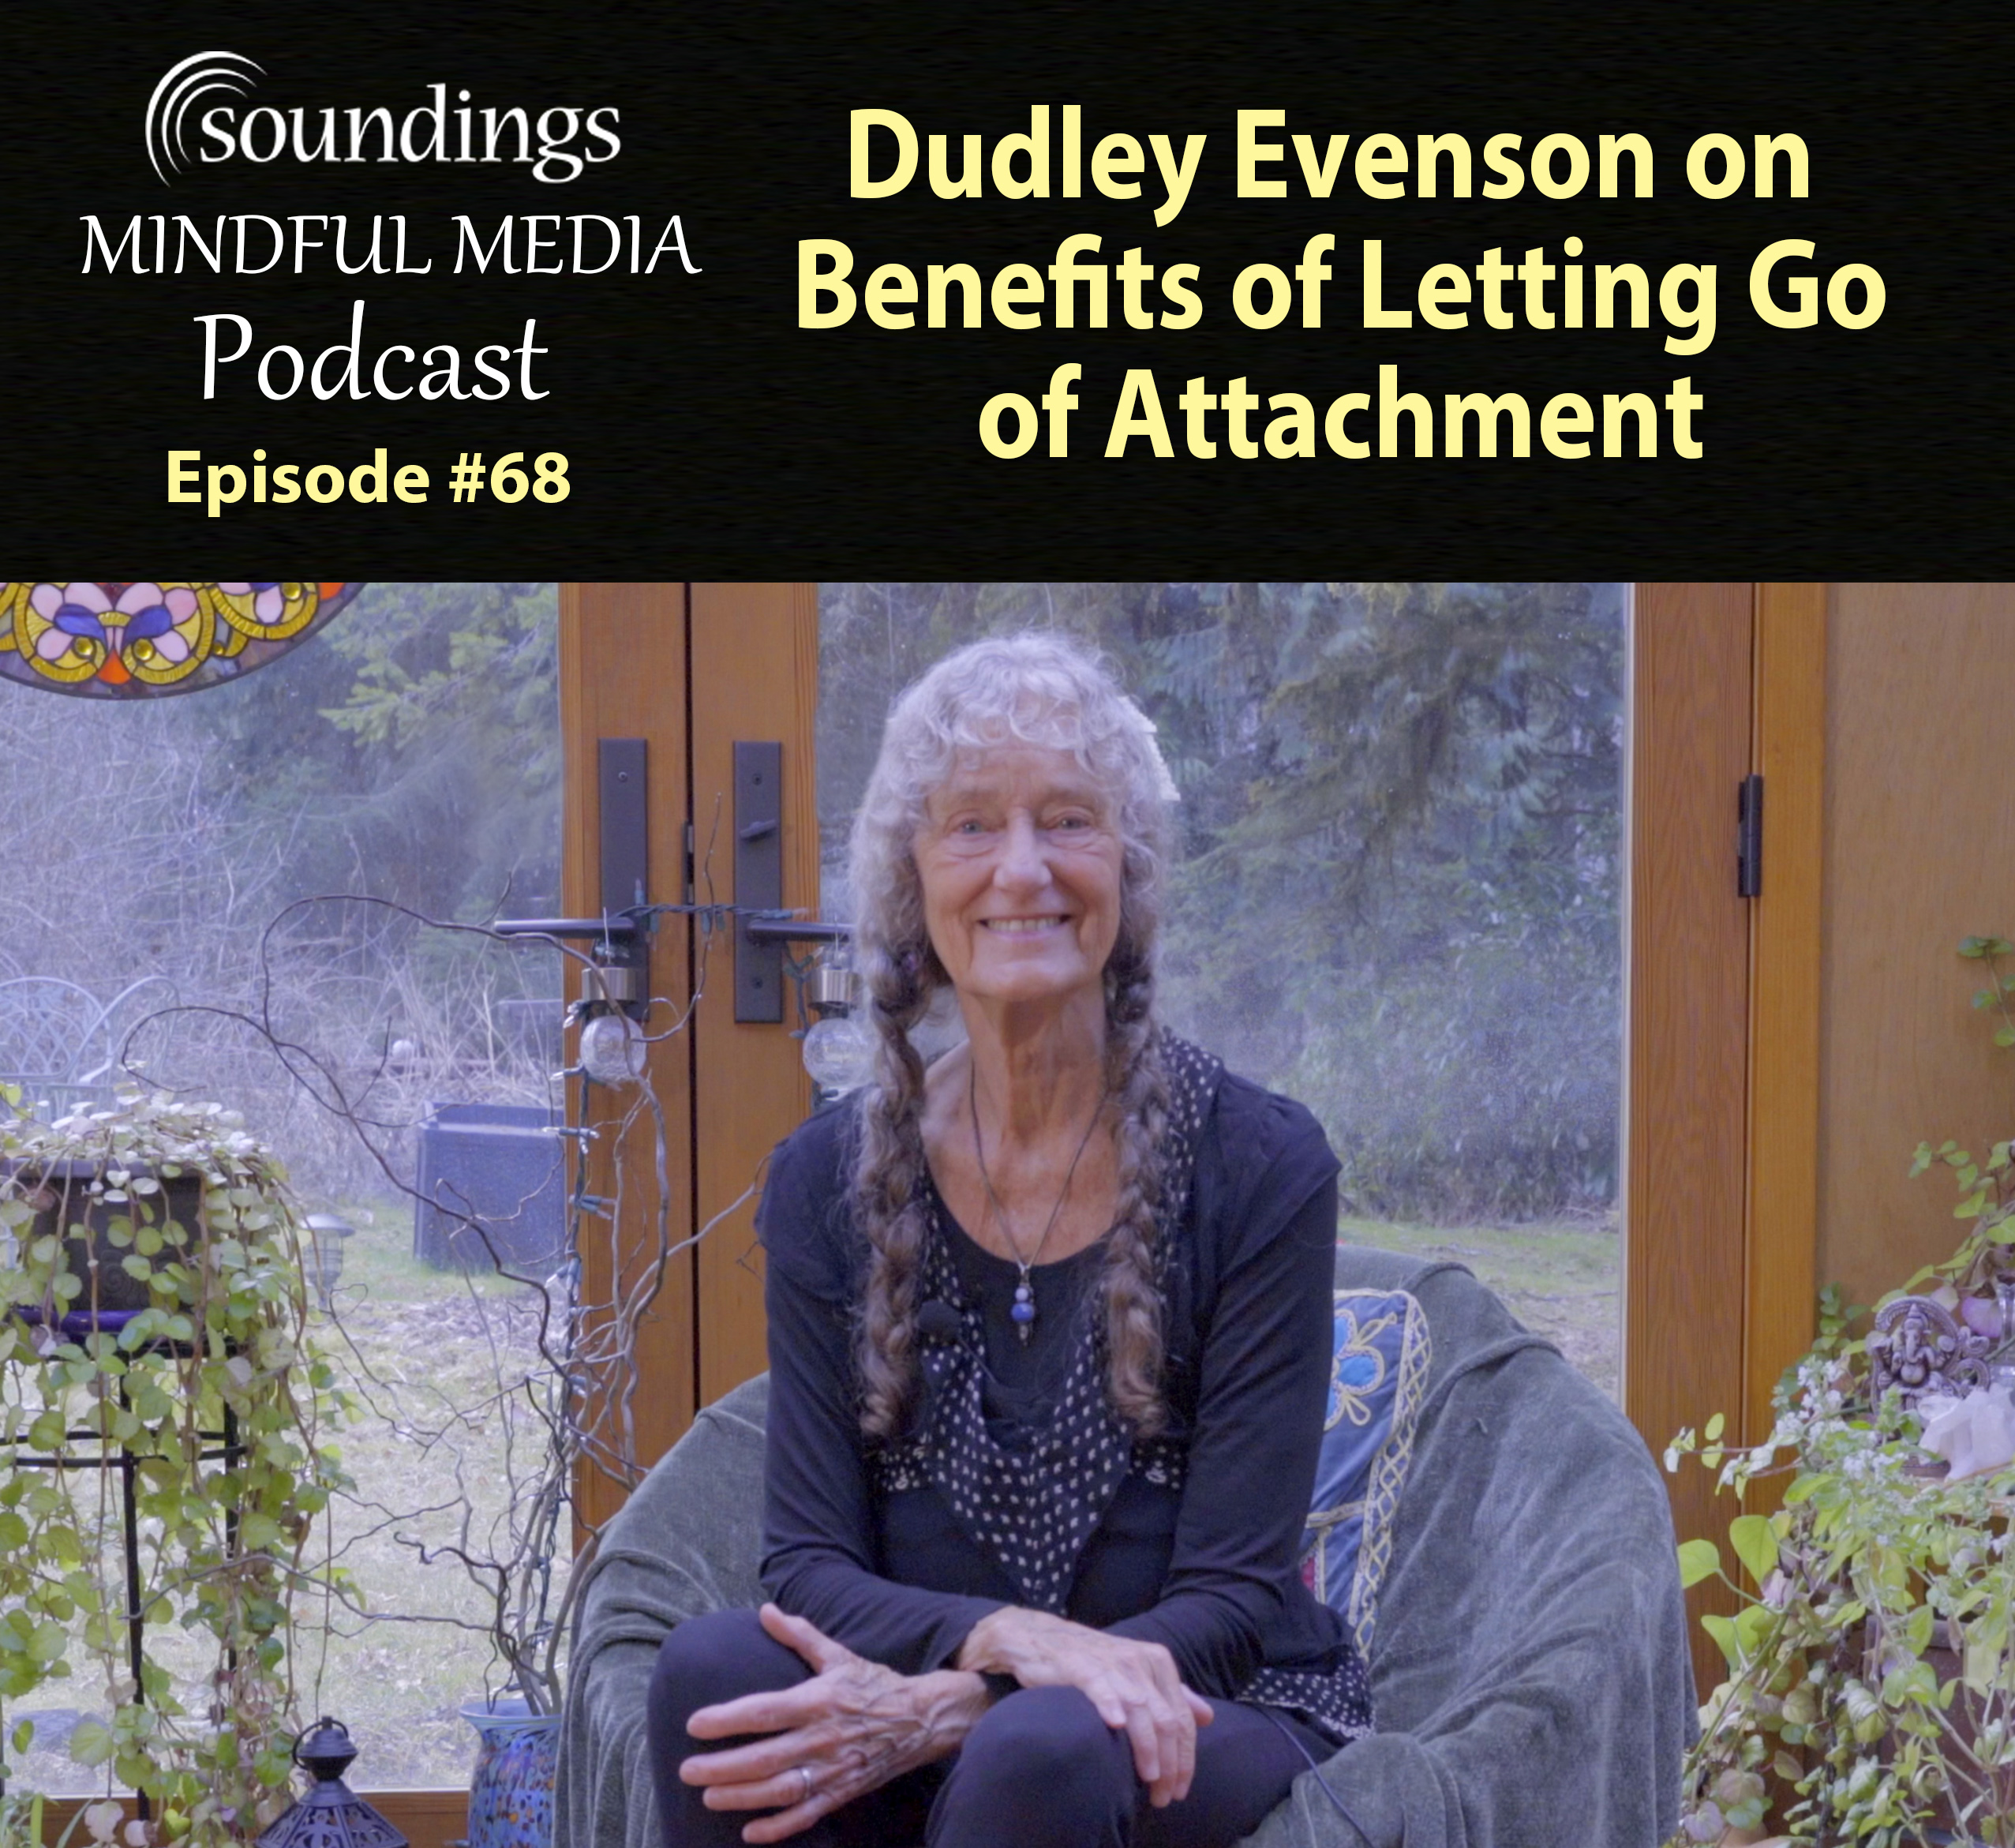 Dudley Evenson on Benefits of Letting Go of Attachment